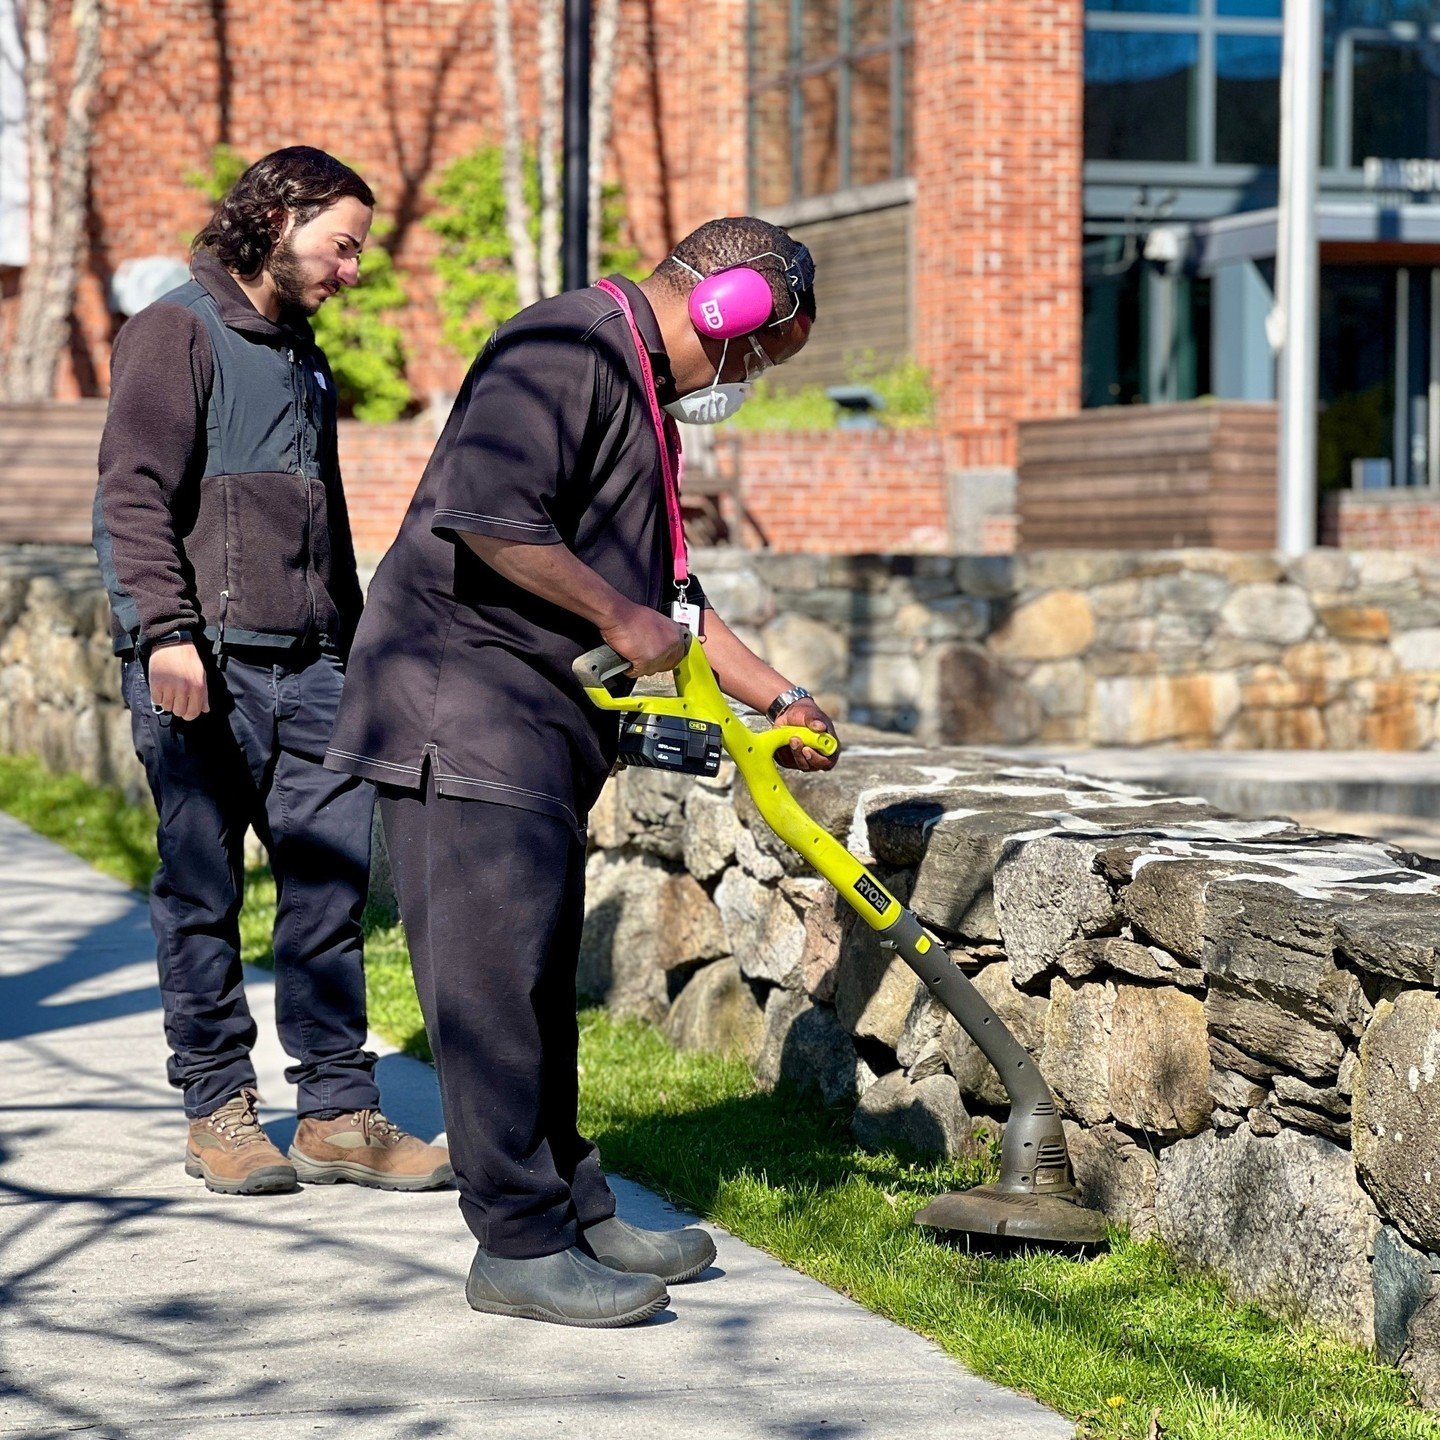 Welcoming in May with landscaping work! Sparkle on, MC Dan and Adam! 🌱🌸✨ ⁠
.⁠
.⁠
.⁠
.⁠
.⁠
Photo caption: 1. Adam supervises MC Dan as he uses a weed whacker to trim grass along a stone wall. 2. MC Dan mows the lawn outside of the Theater. #SparkleO